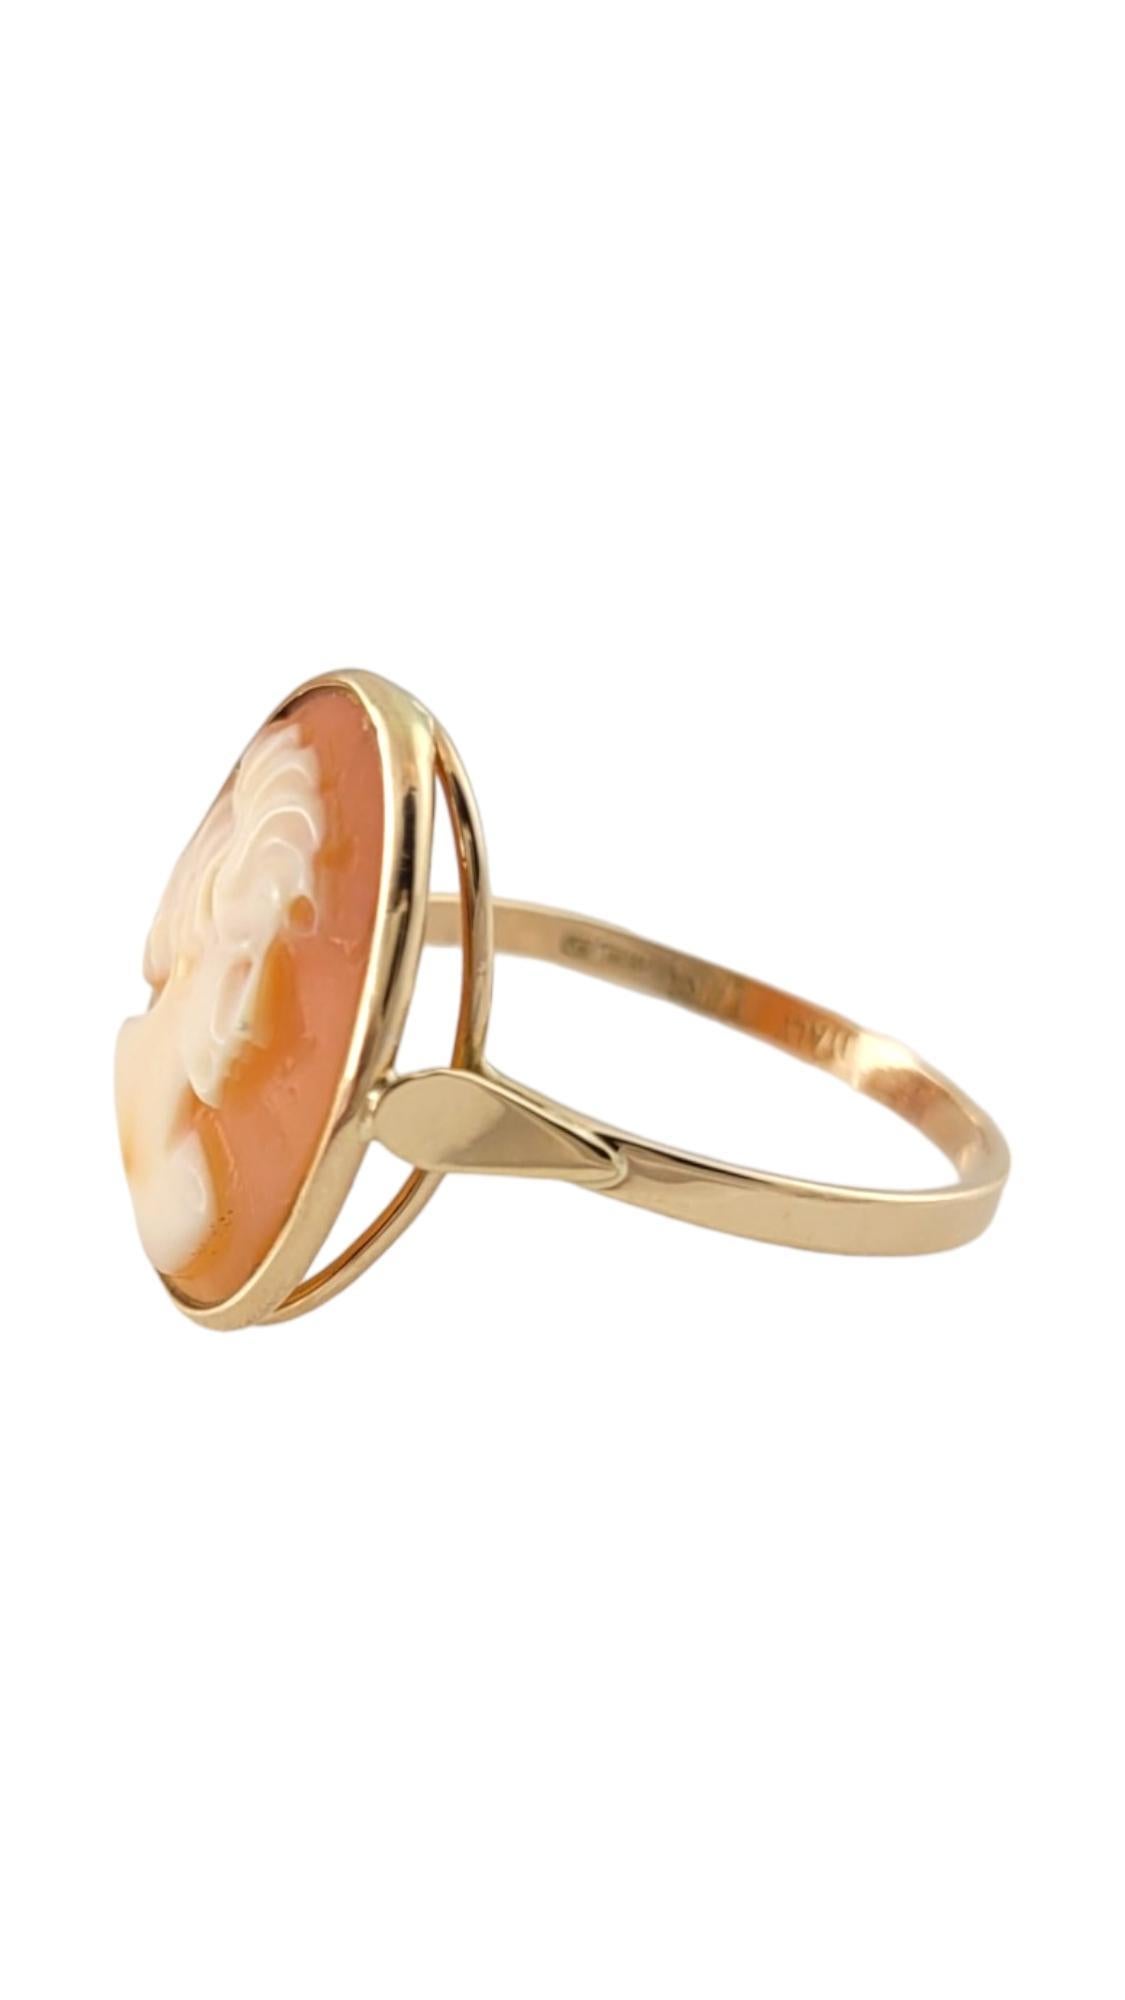 Vintage 14K Yellow Gold Cameo ring Size 7.25

This beautiful cameo ring is crafted from 14K yellow gold and would look beautiful on anybody!

Ring size: 7.25
Shank: 1.7mm
Front: 16.8mm X 13.8mm X 4.0mm

Weight: 1.4 dwt/ 2.1 g

Hallmark: 14Kt